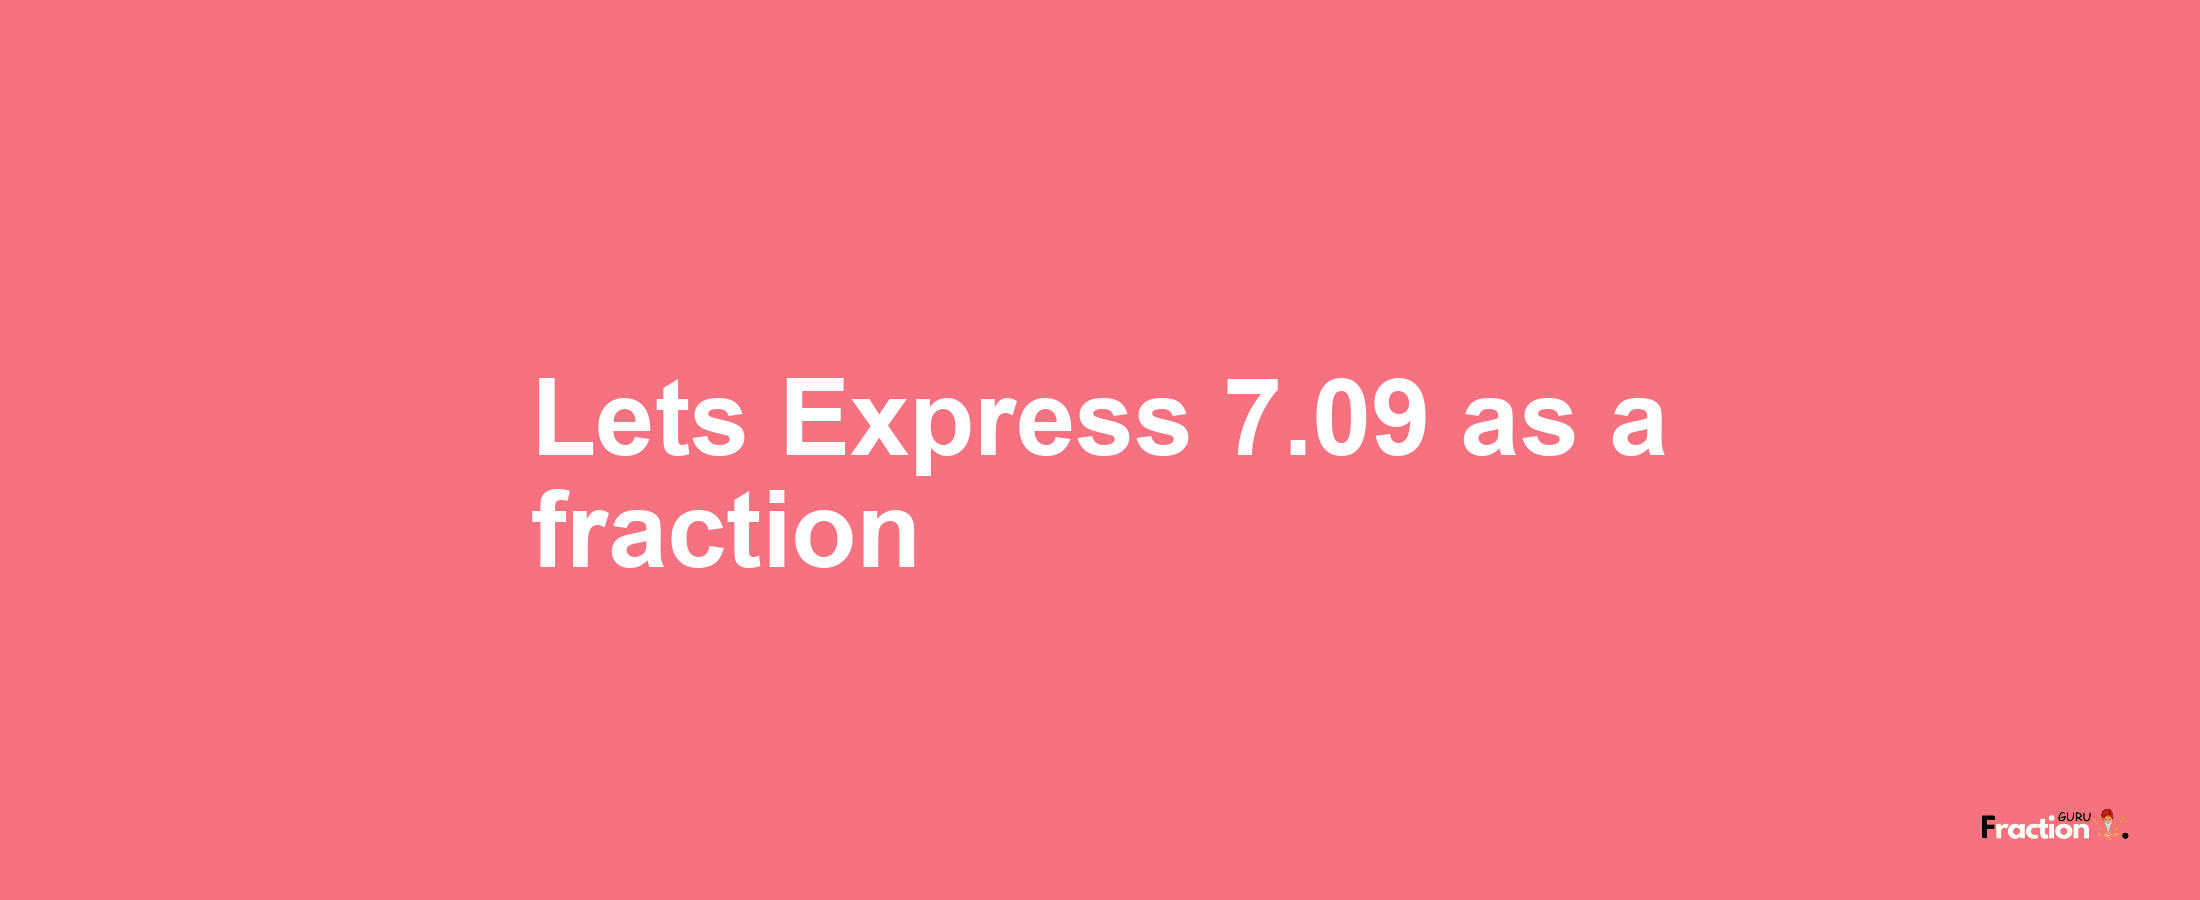 Lets Express 7.09 as afraction